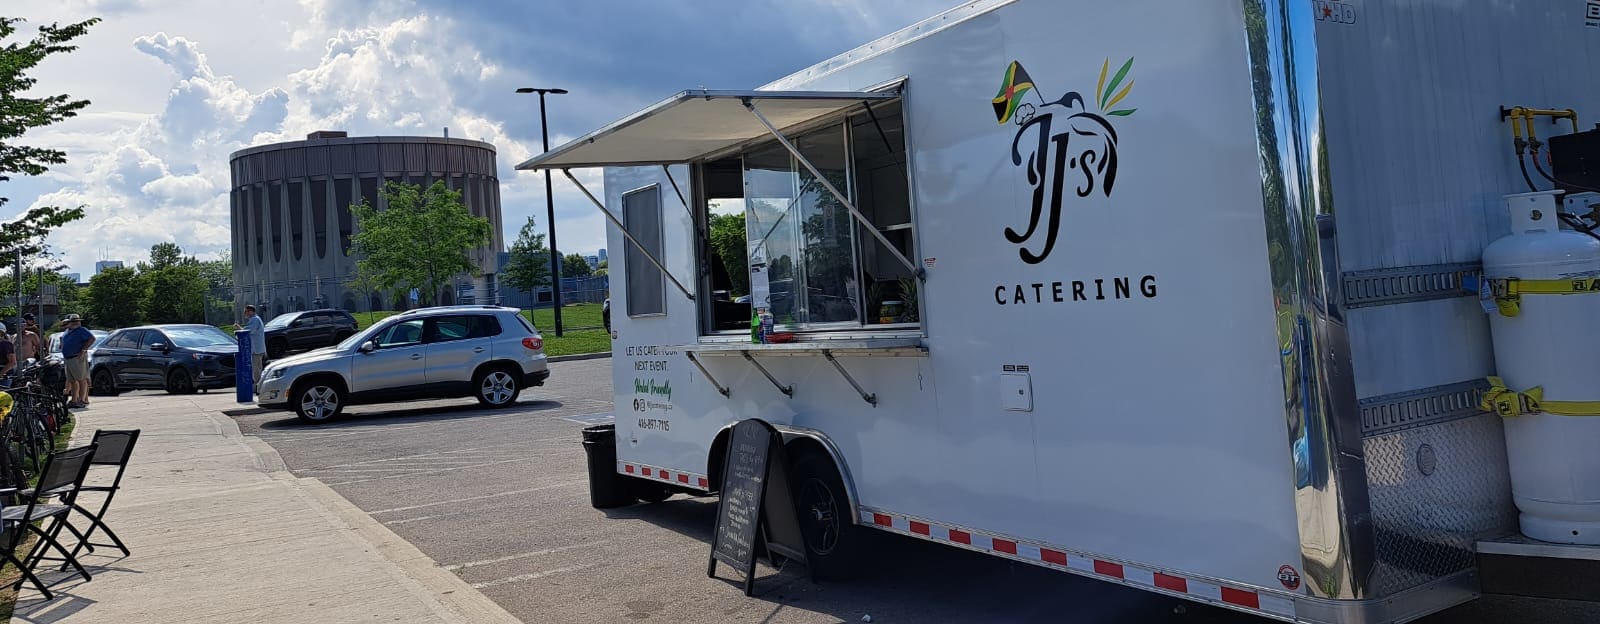 JJs Catering